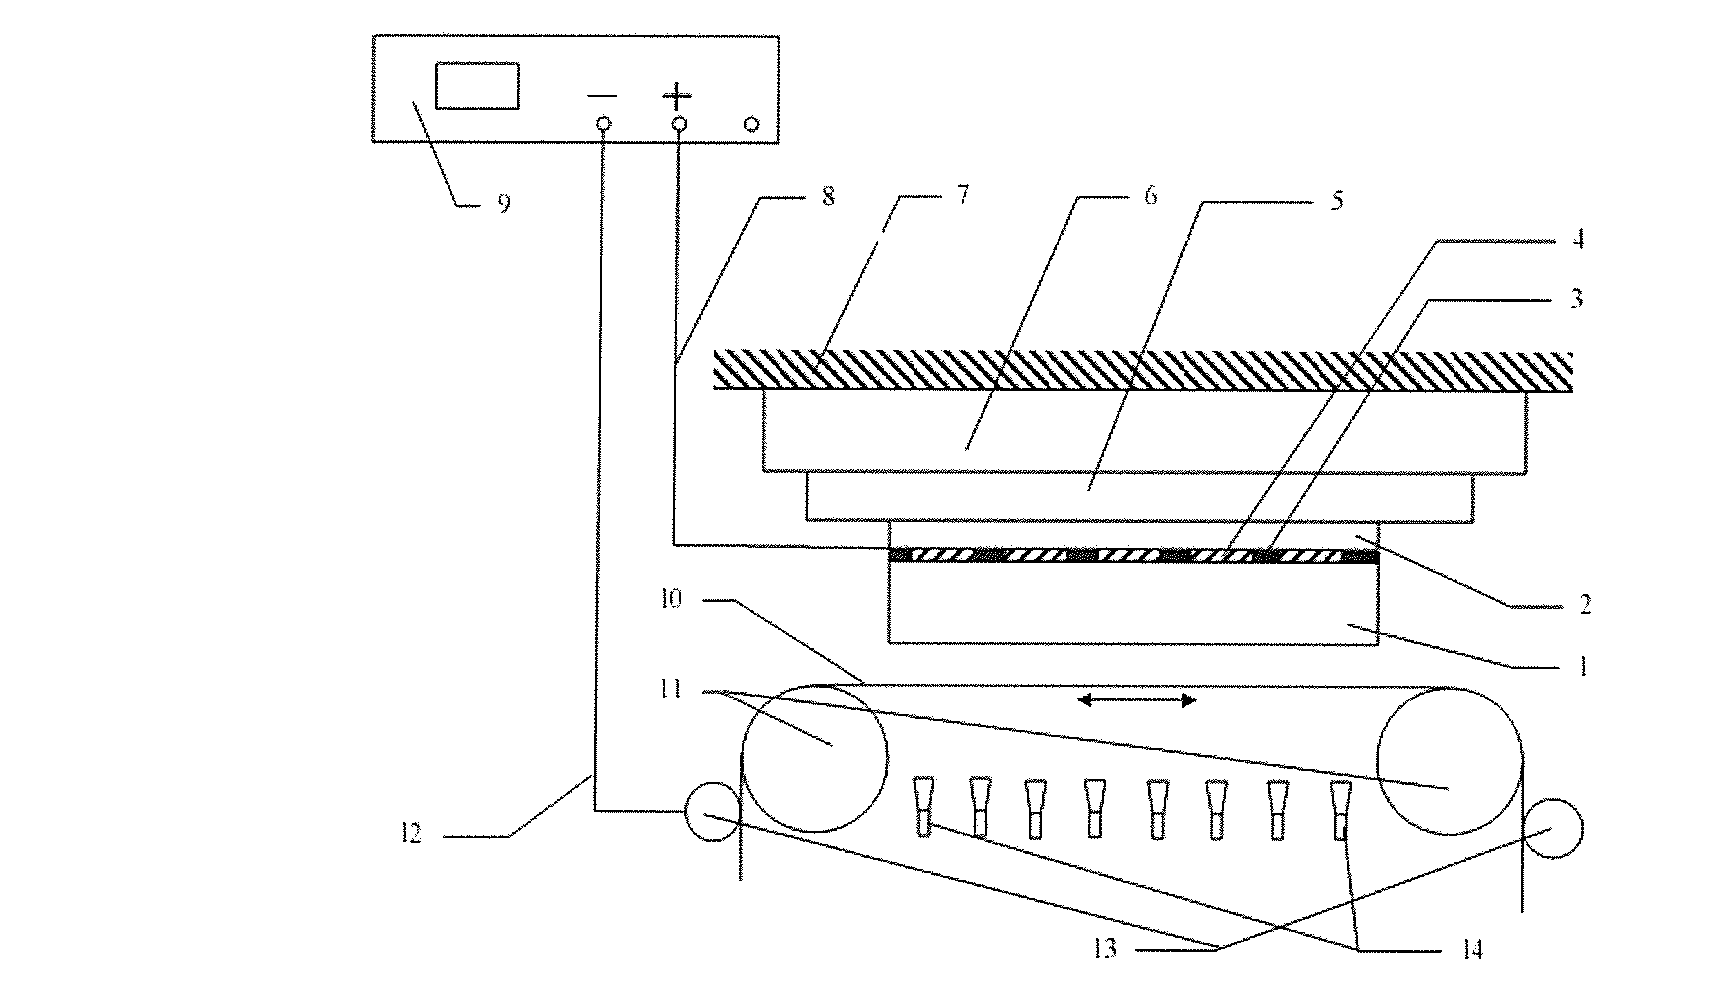 Grinding/electrolysis combined multi-wire-slicing processing method for silicon wafers